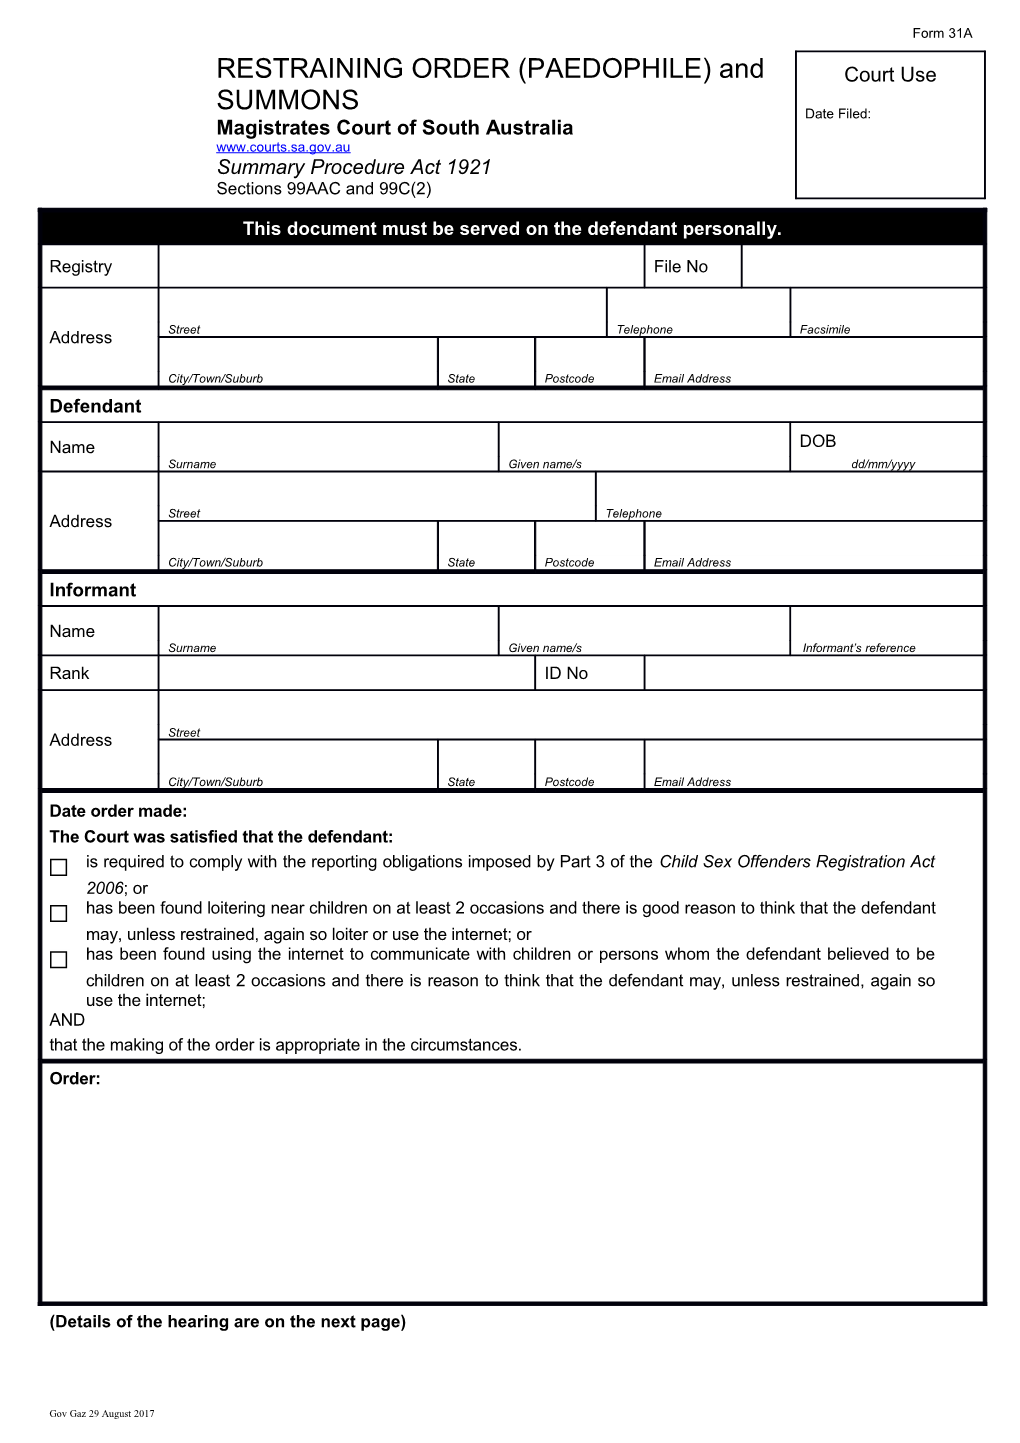 Form 31A - Restraining Order (Paedophile) and Summons